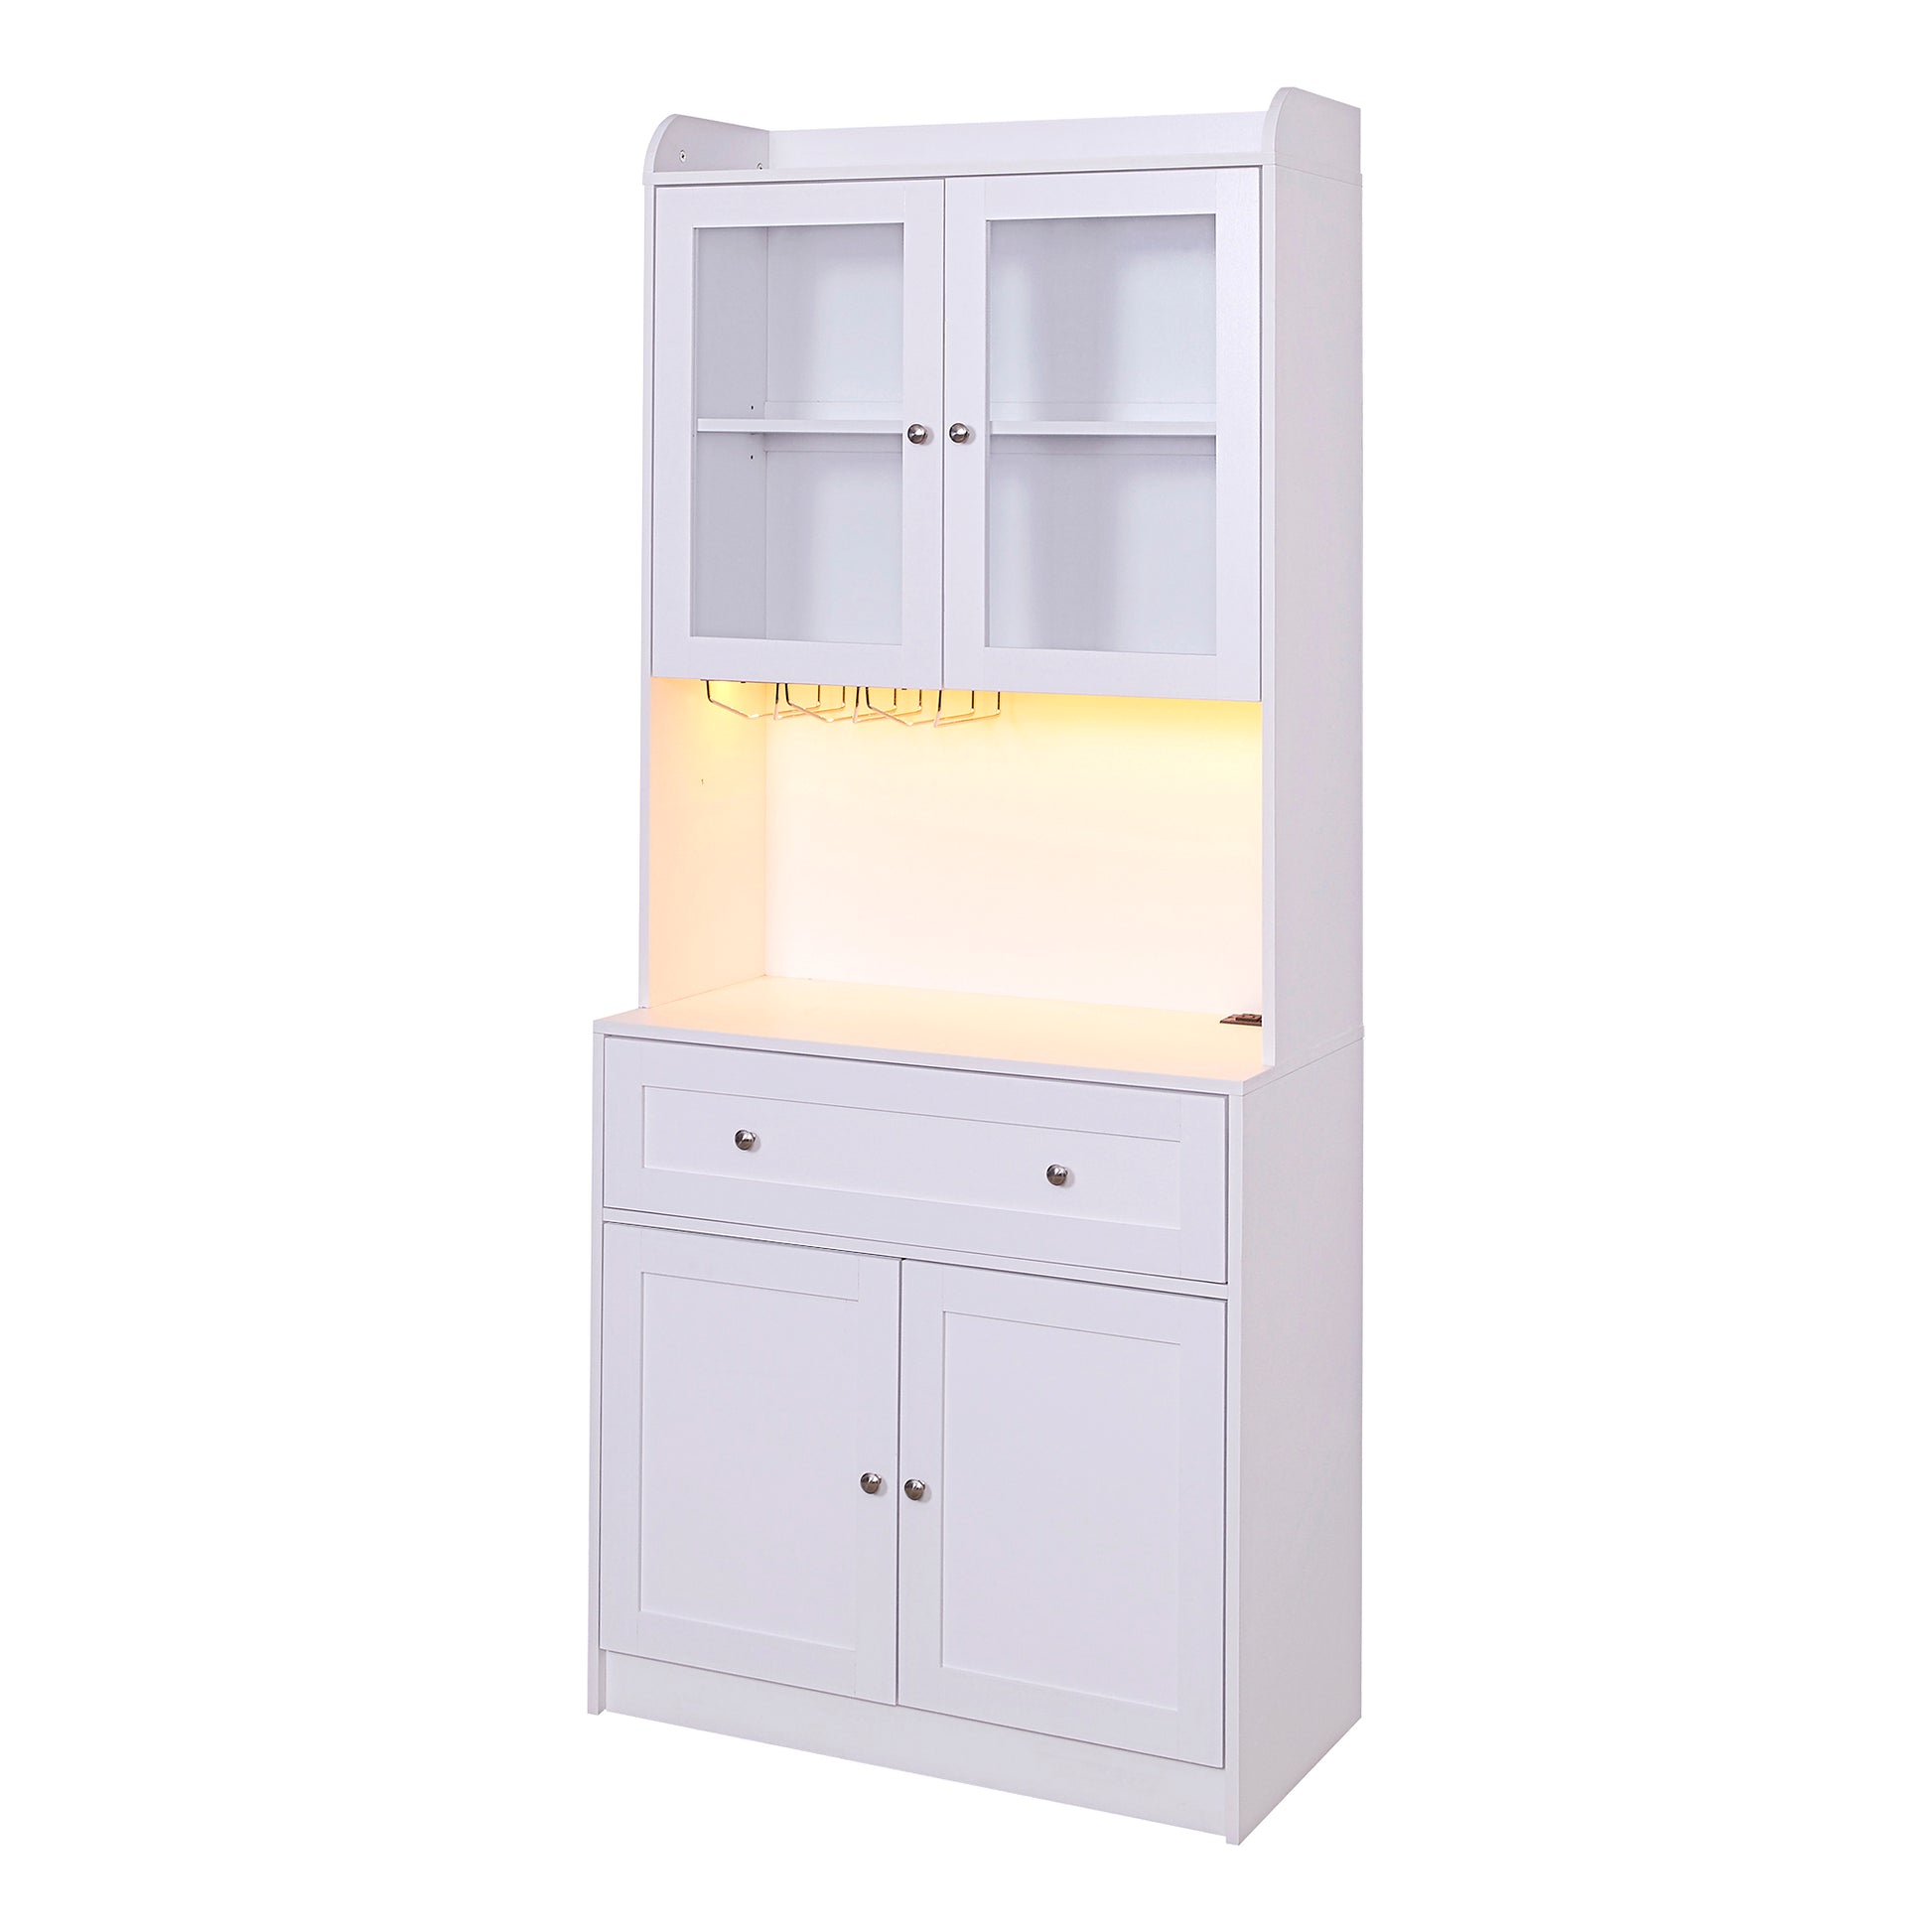 75.2" Tall Kitchen Pantry Storage Cabinet With